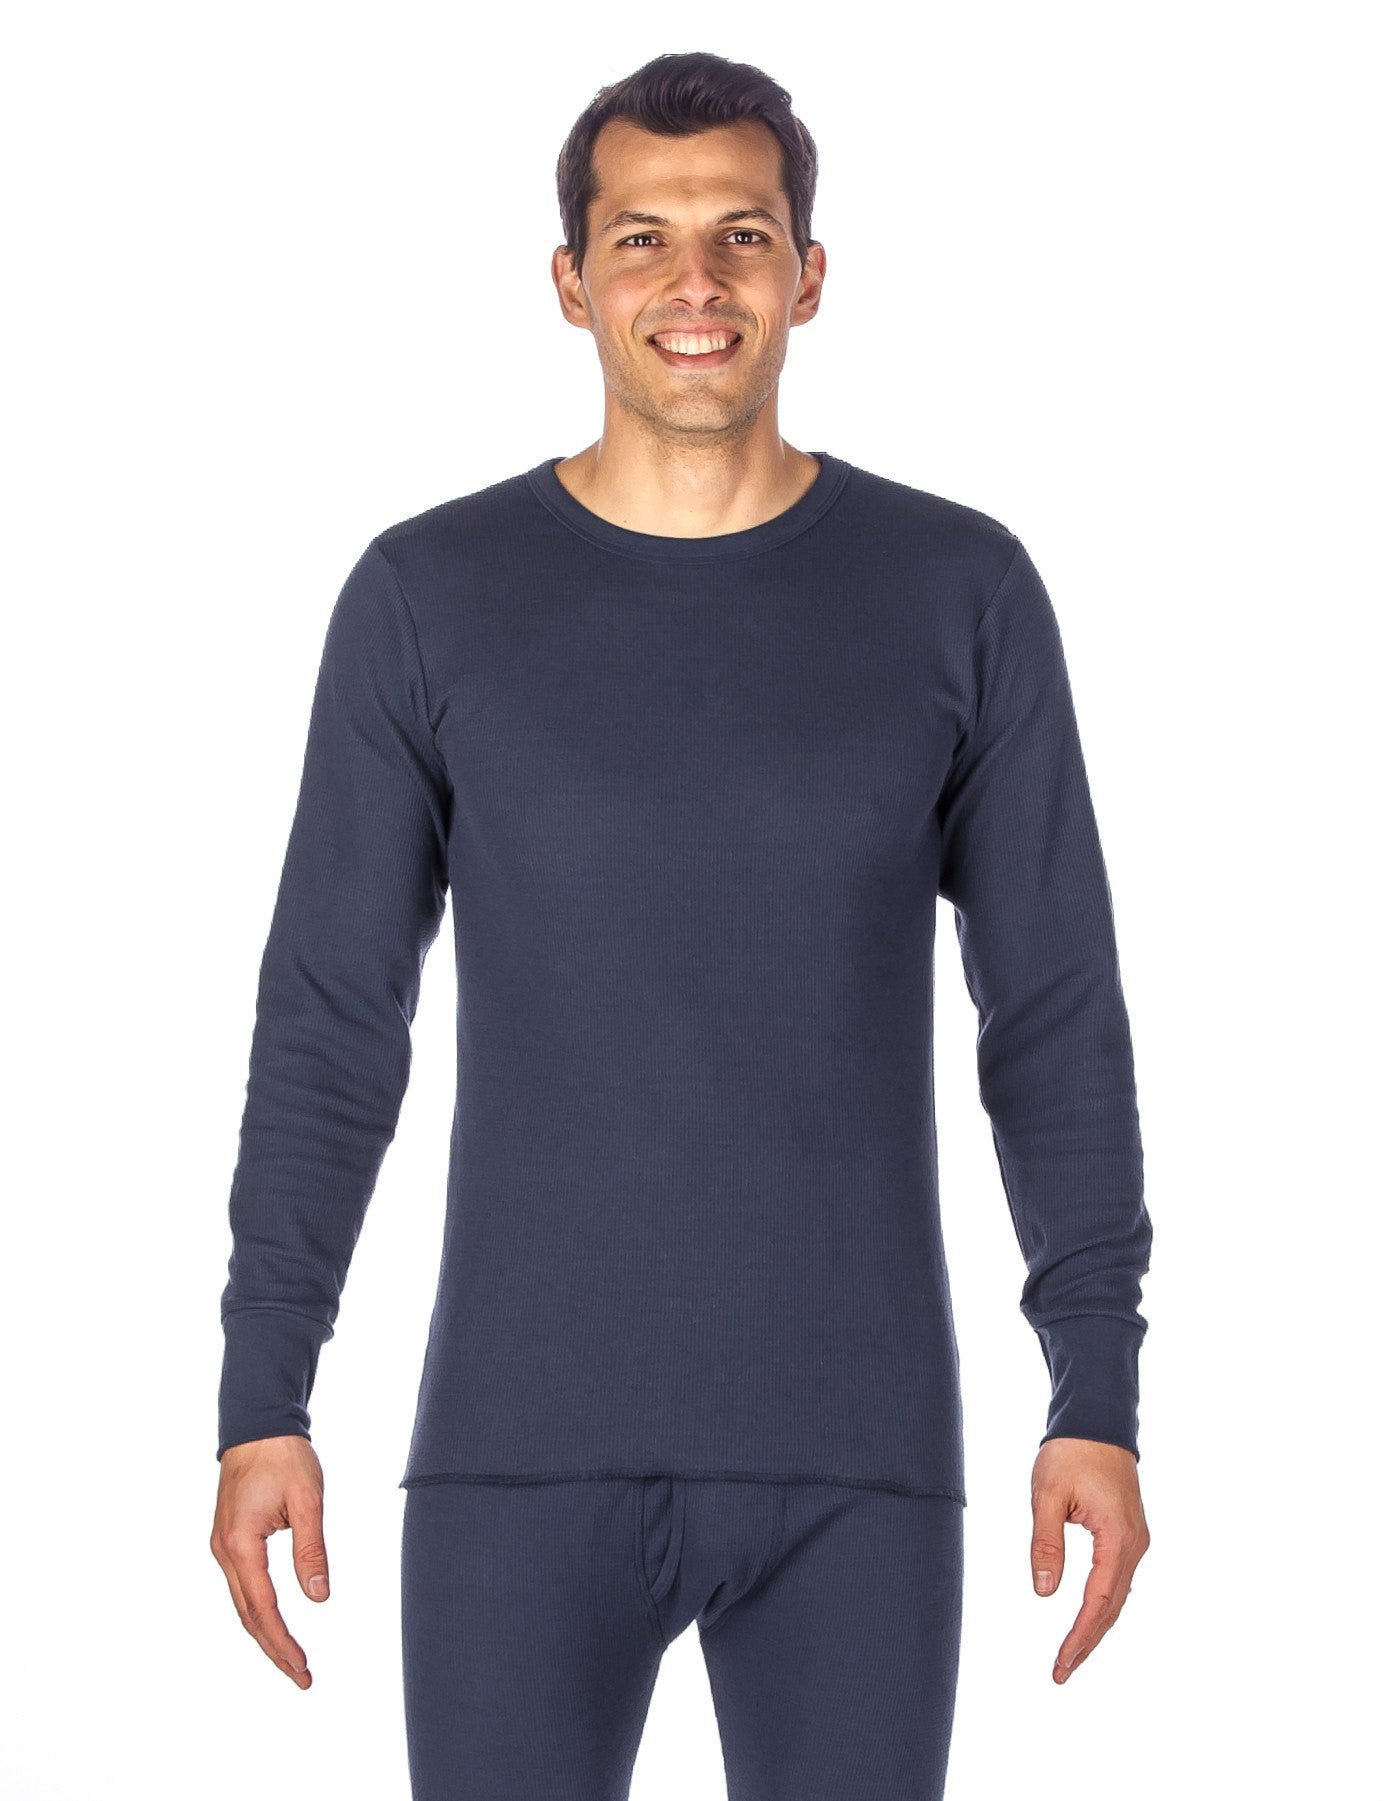 Noble Mount Men's Classic Waffle Knit Thermal Crew Top